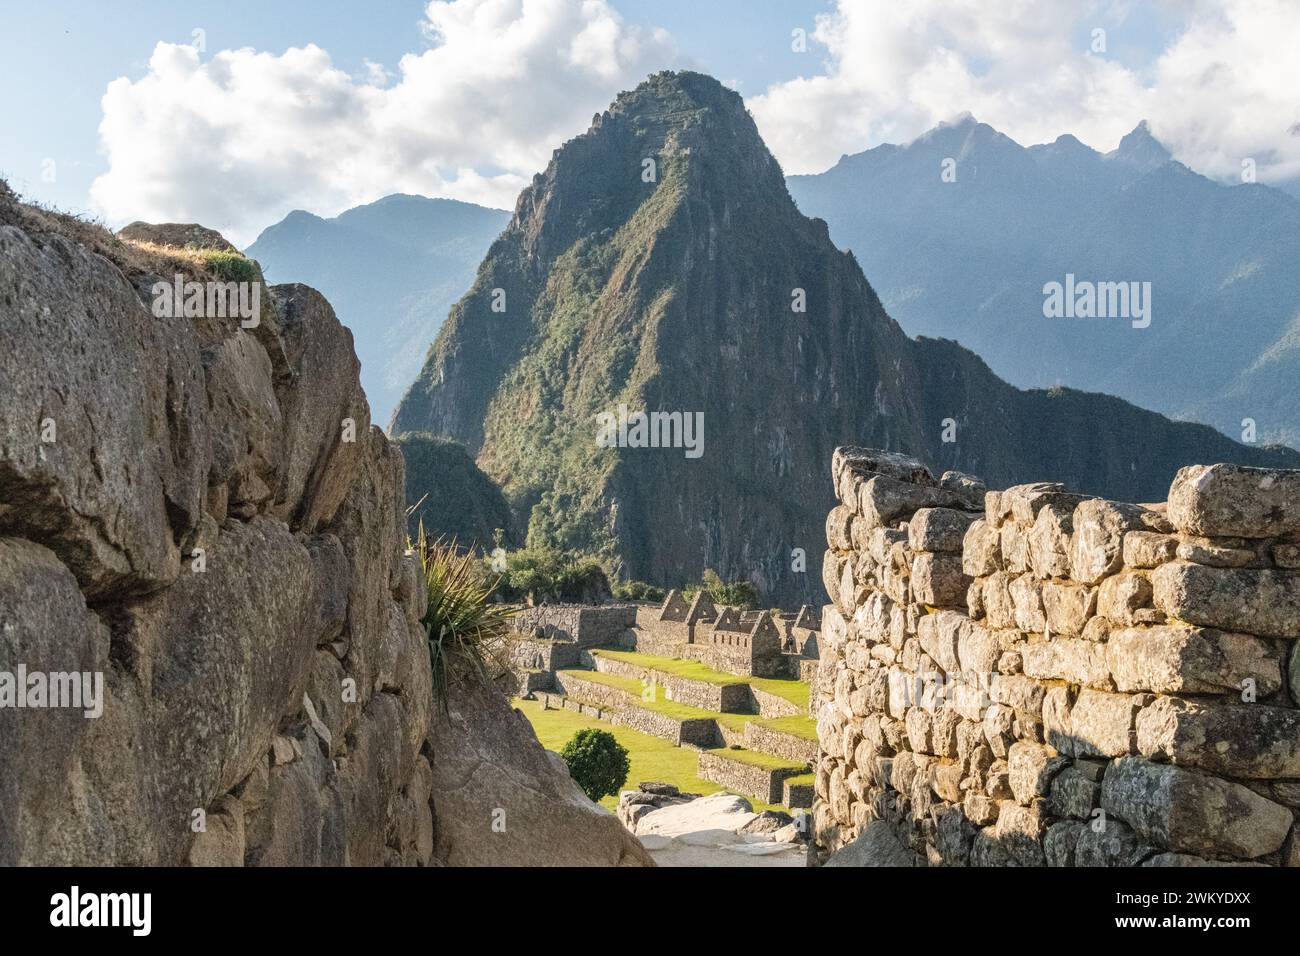 A view of Machu Picchu citadel lost city ruins and Huayna Picchu in Per Stock Photo